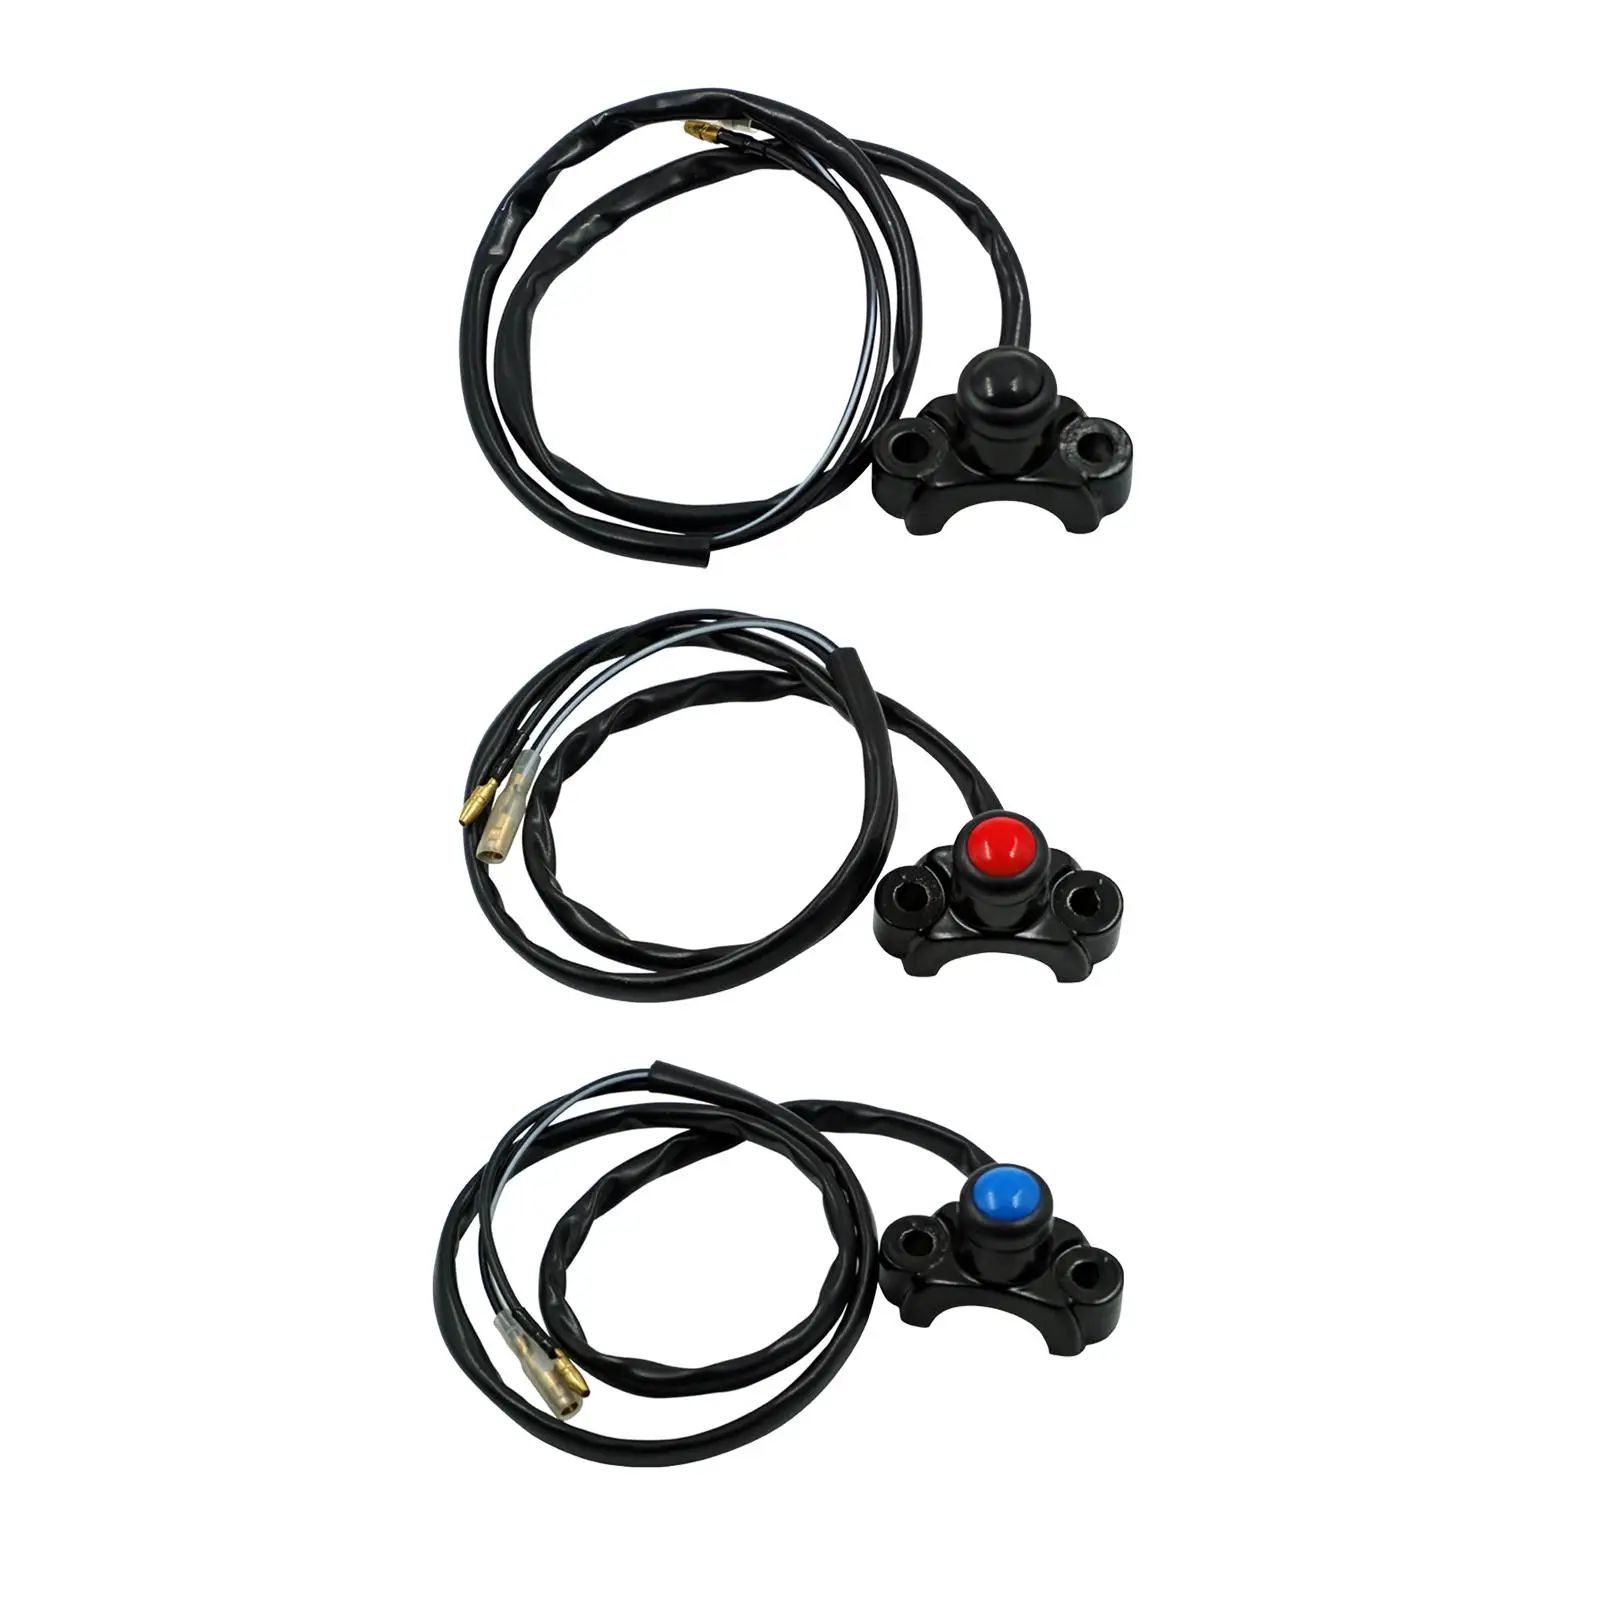 22mm 7/8in Motorcycle Handlebar Switch for Driving Running Bike